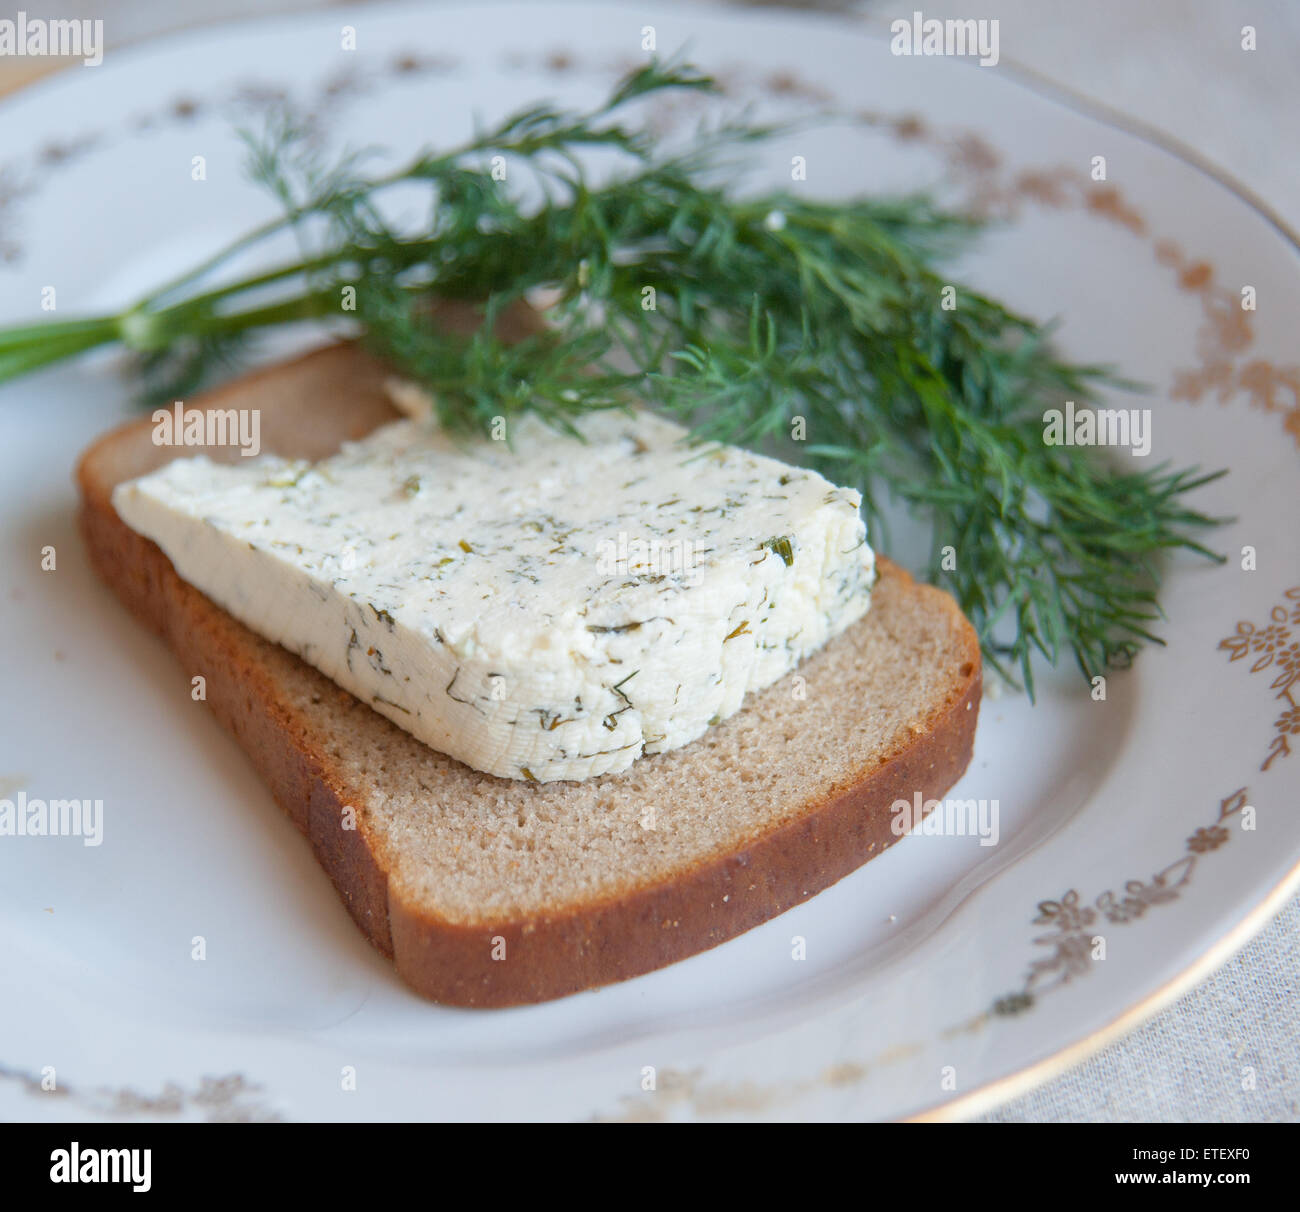 kozeva piece of cheese on a plate with greens Stock Photo